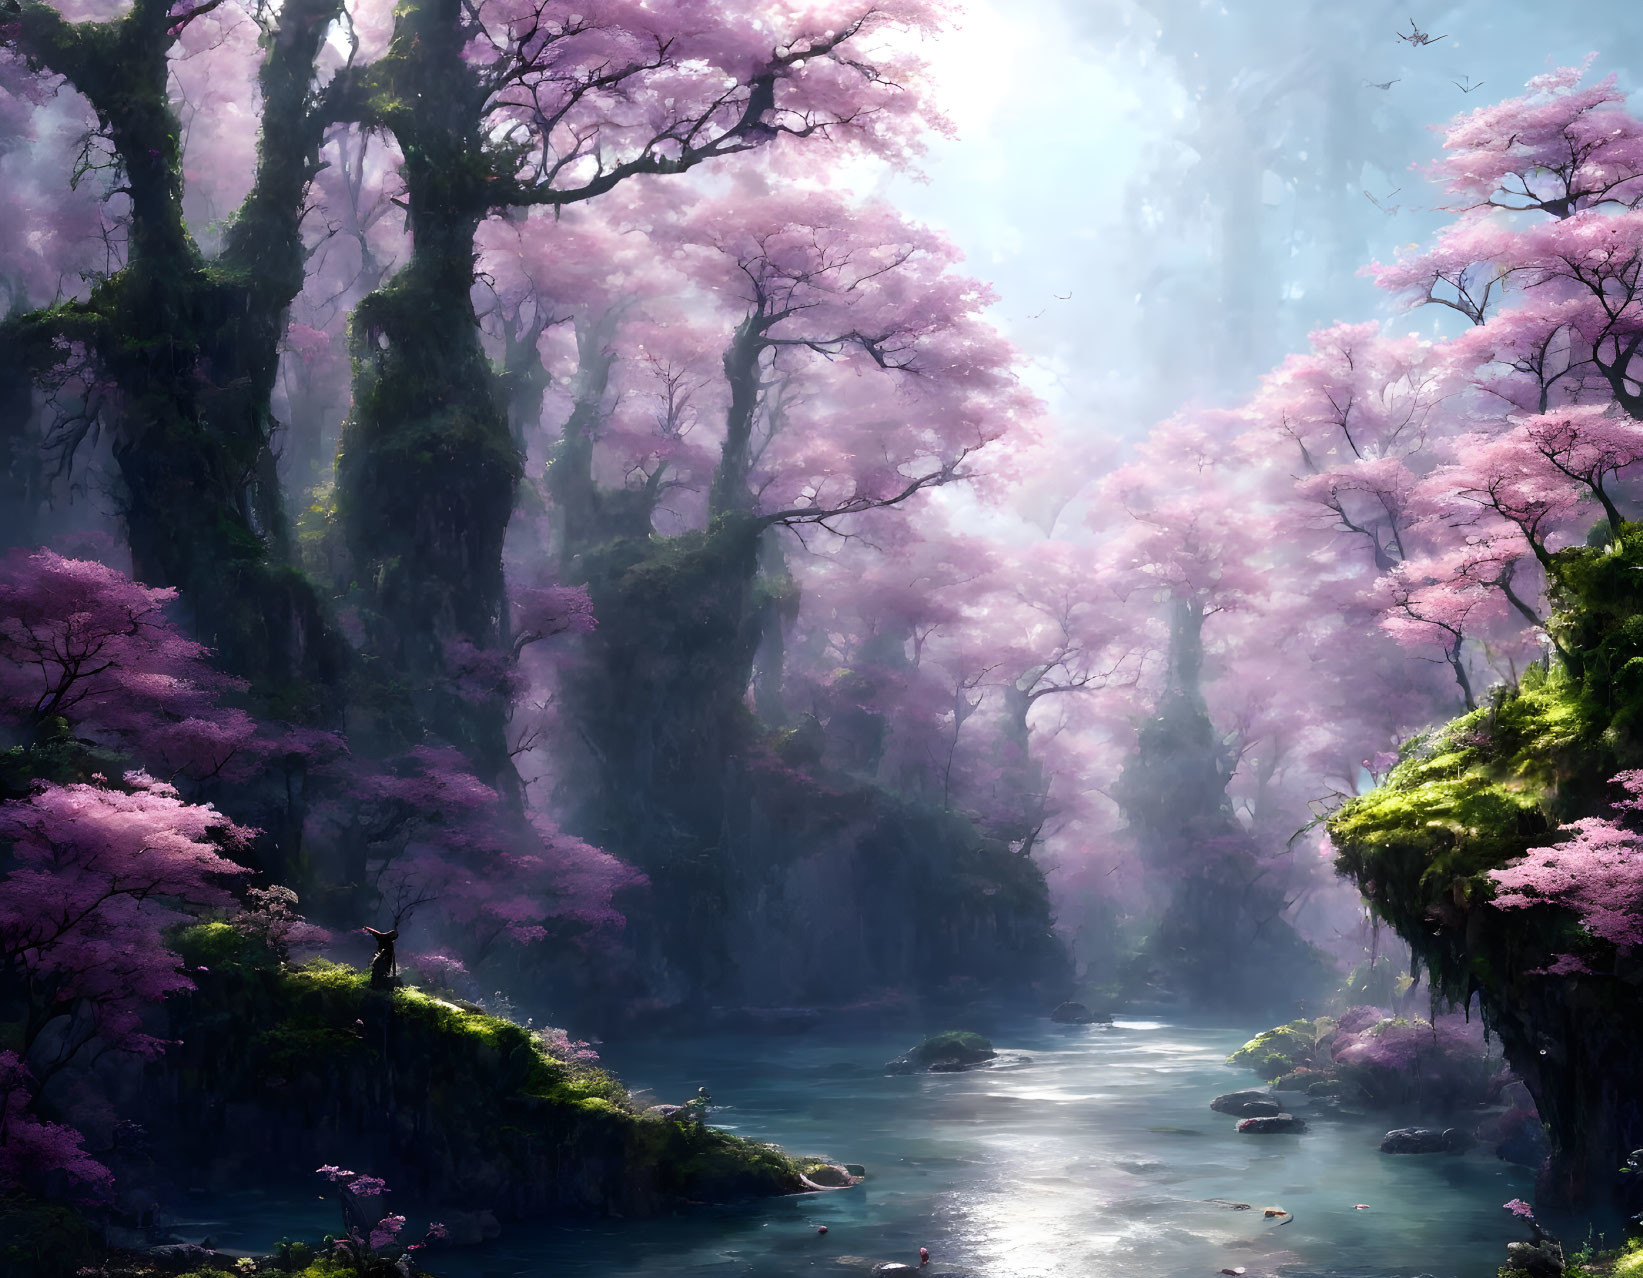 Tranquil forest with stream, tall trees, and pink blossoms